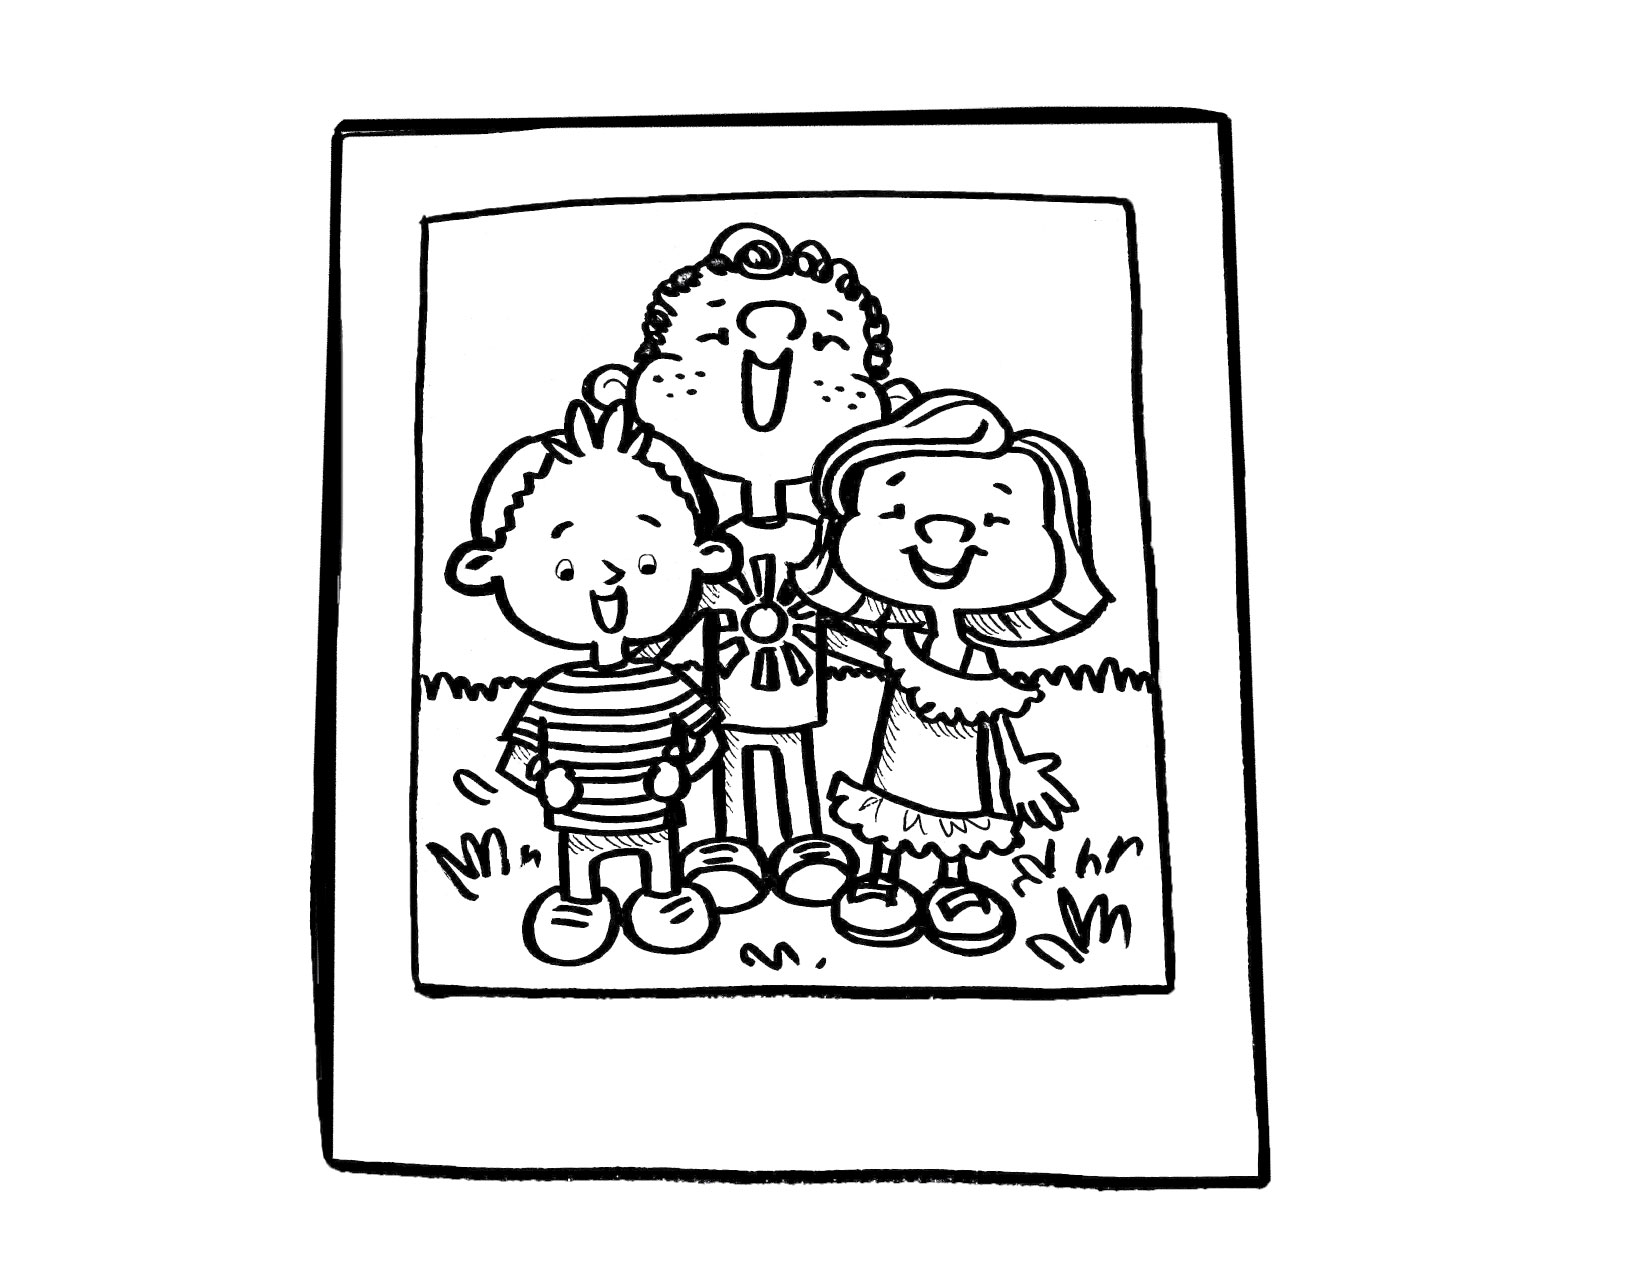 Black and white illustration of three children smiling in a polaroid picture